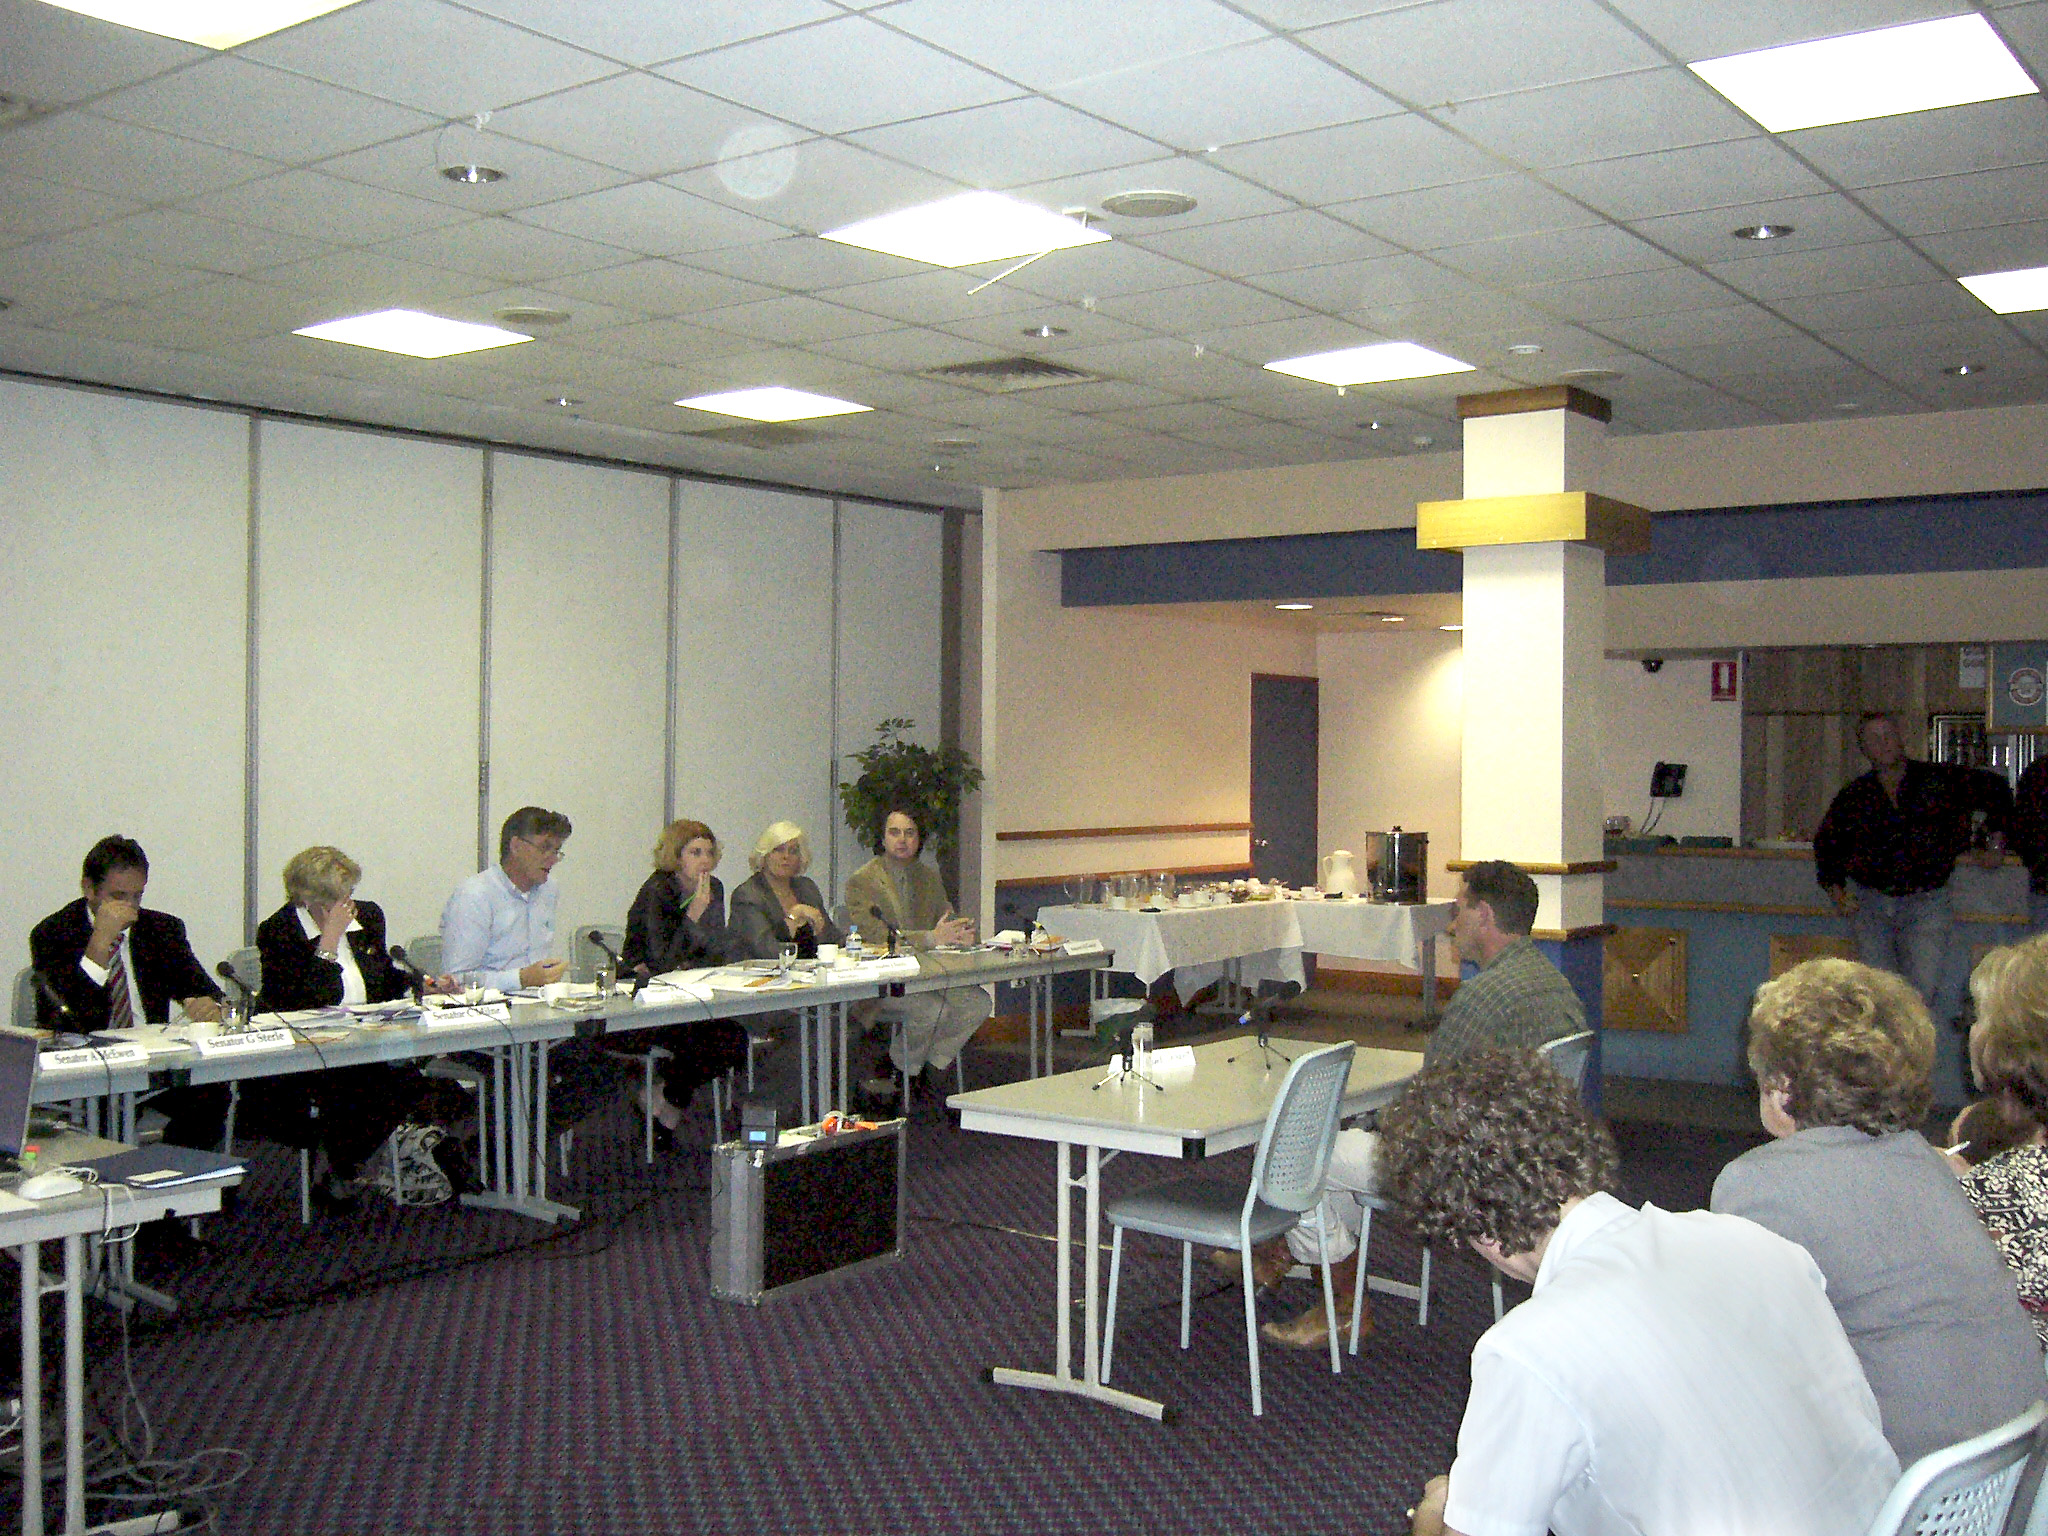 Rural and Regional Affairs and Transport Legislation Committee hearing evidence from witness Michael Benham at a public hearing in Emerald, Qld, of its inquiry into the Department of Agriculture, Fisheries and Forestry’s administration of the citrus canker outbreak, 28 July 2005. Seated L-R: Senators Glenn Sterle, Christine Milne and Bill Heffernan [Chair], Maureen Weeks [Secretary], Senators Jeannie Ferris and Julian McGauran.